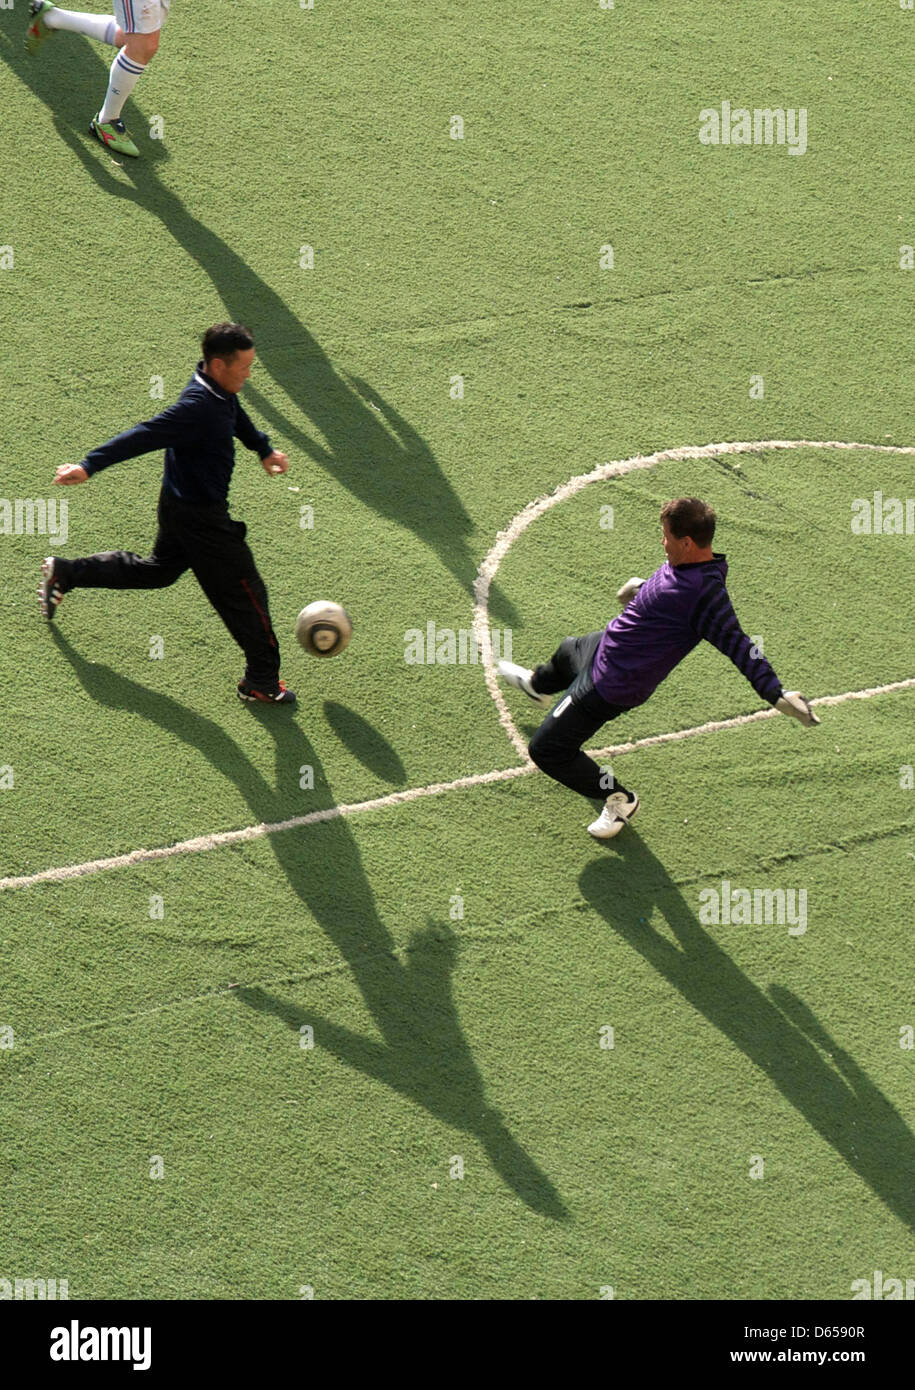 Mongolian recreational soccer players attend their weekly training session at a soccer field in the center of Ulan Bator, Mongolia, 11 June 2012. Many Mongolians are avid soccer fans and keenly follow the UEFA Euro 2012 in Ukraine and Poland. Photo: Nicole Graaf Stock Photo